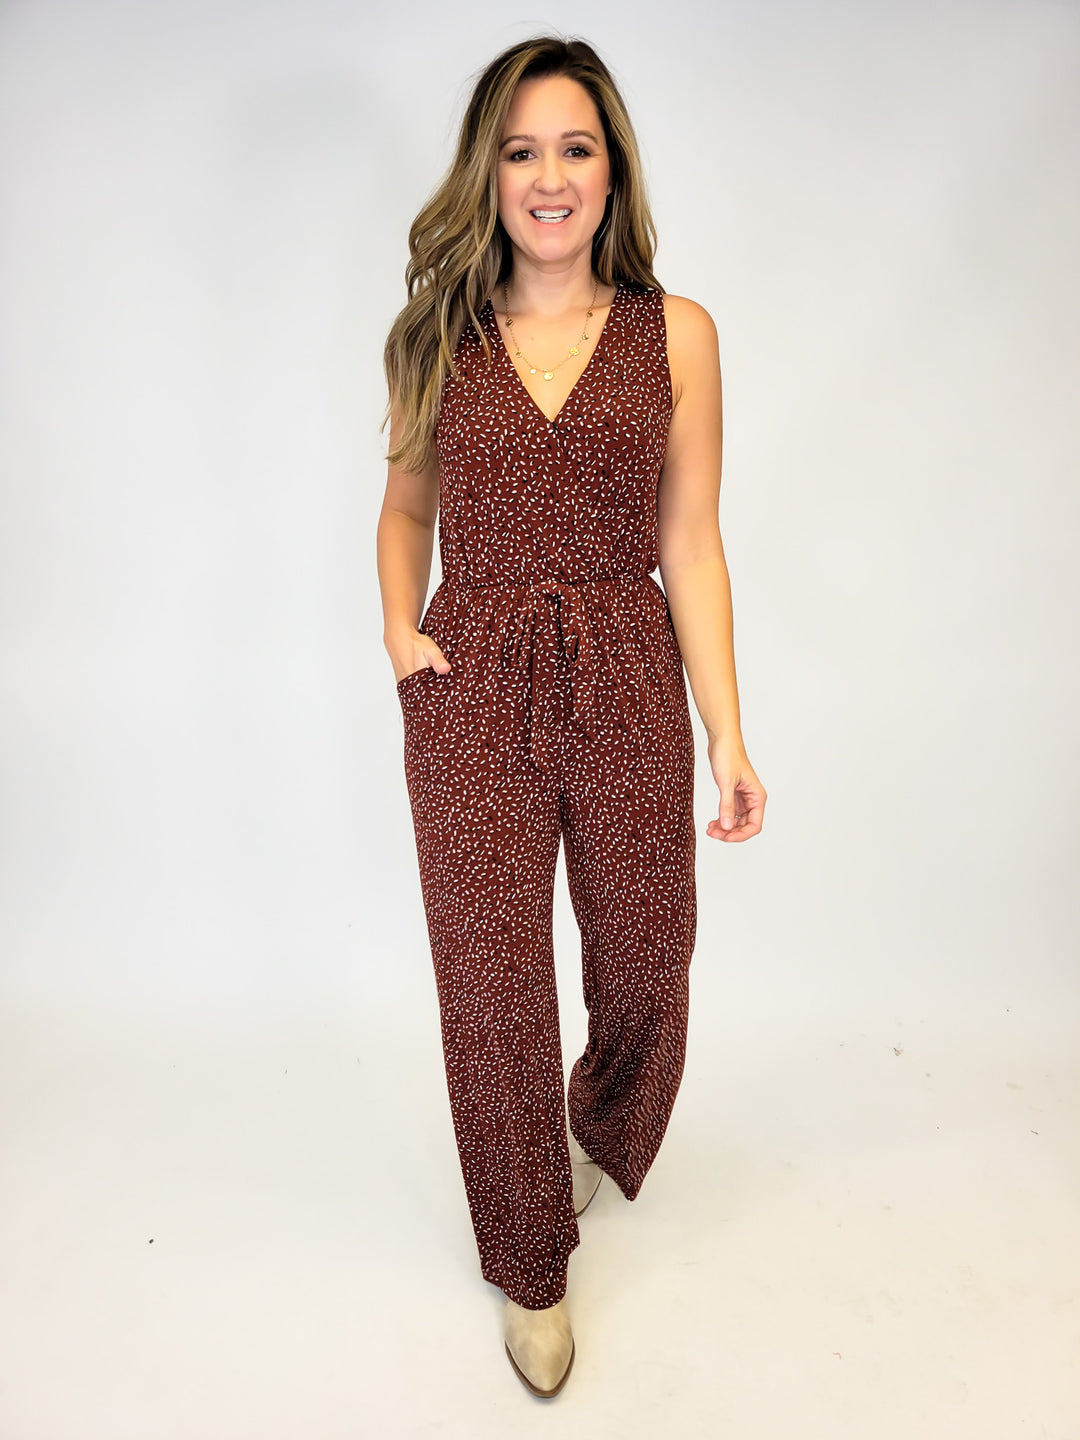 DOT PRINT SLEEVELESS LINED JUMPSUIT - BROWN